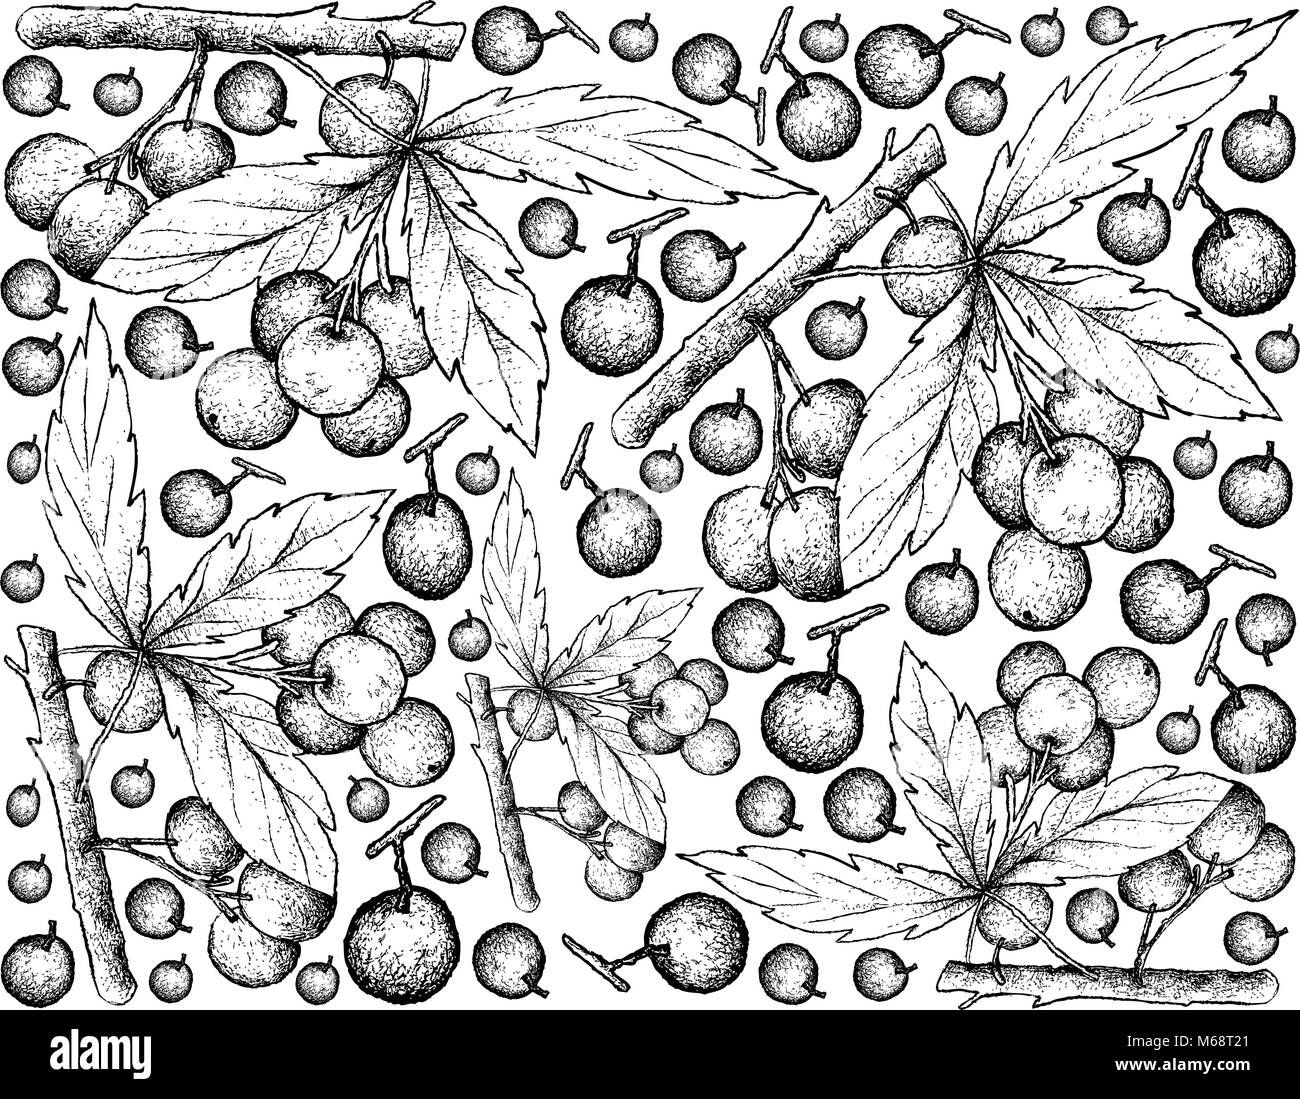 Berry Fruits, Illustration Wallpaper Background of Hand Drawn Sketch Allophylus Edulis or Chal-Chal Fruits Hanging on The Bunch. Stock Vector